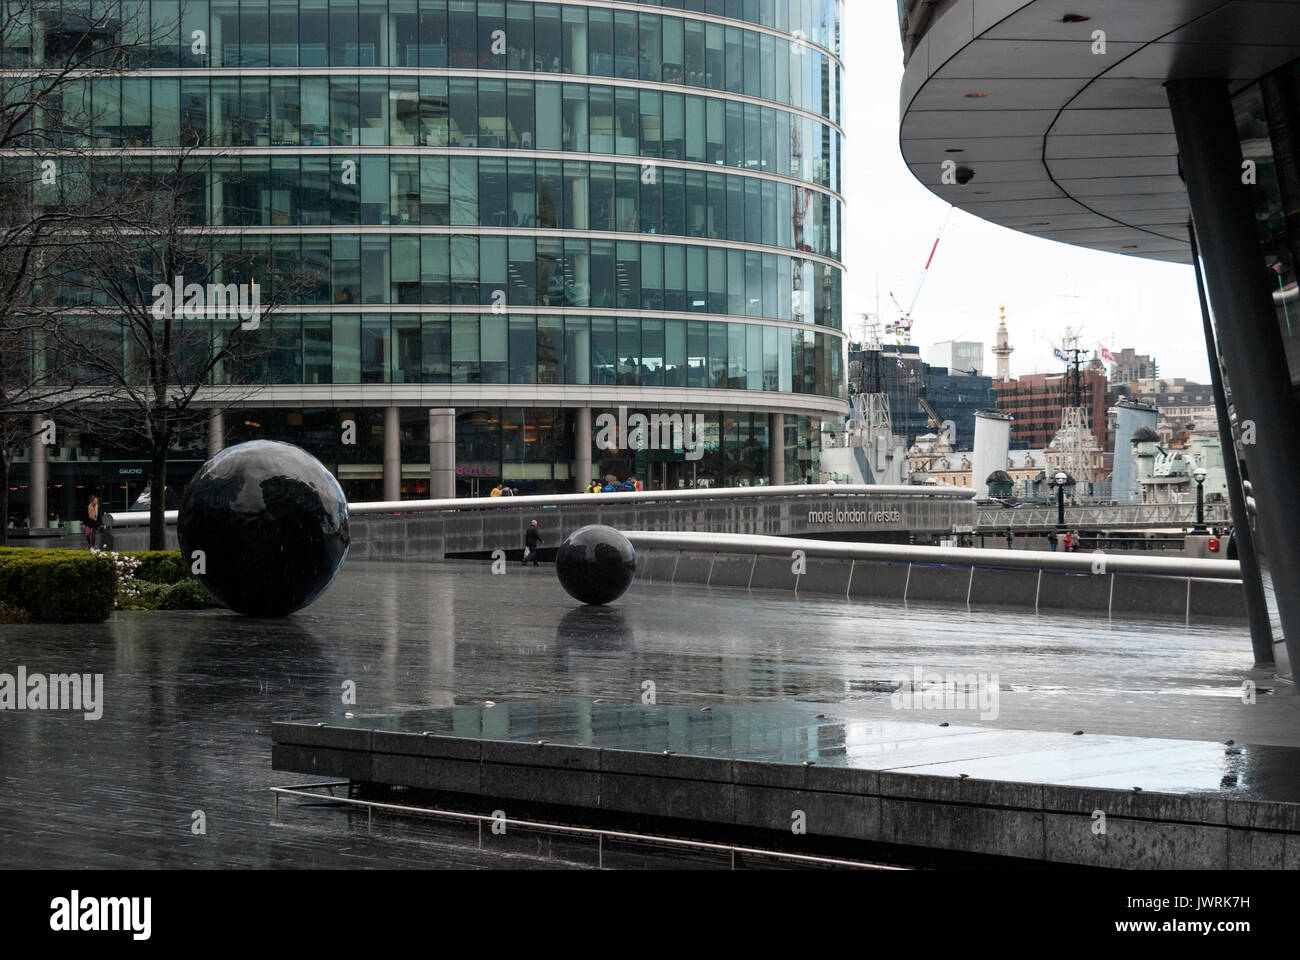 London England, Next to the River Thames, Glass Office Building, Financial District, City of London, Wet Pavement, Commercial, Business, Rained Stock Photo